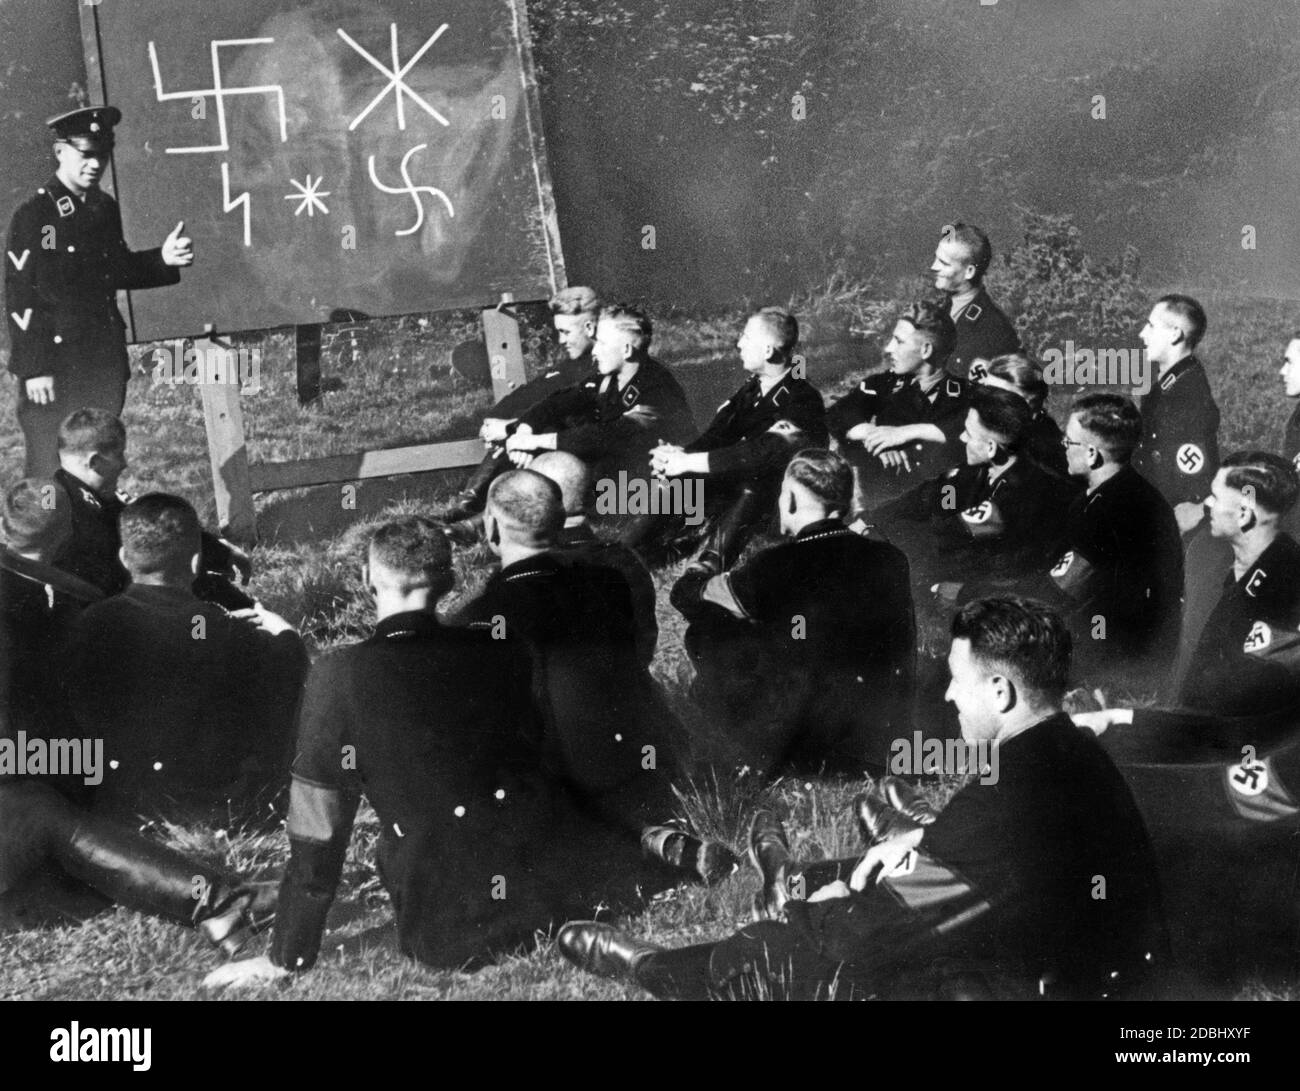 SS-members learn about Germanic runic characters. Here the teacher shows his students the origin of the swastika as a symbol of the National Socialist worldview. All those present wear a swastika armband. Undated photo, circa 1935. Stock Photo